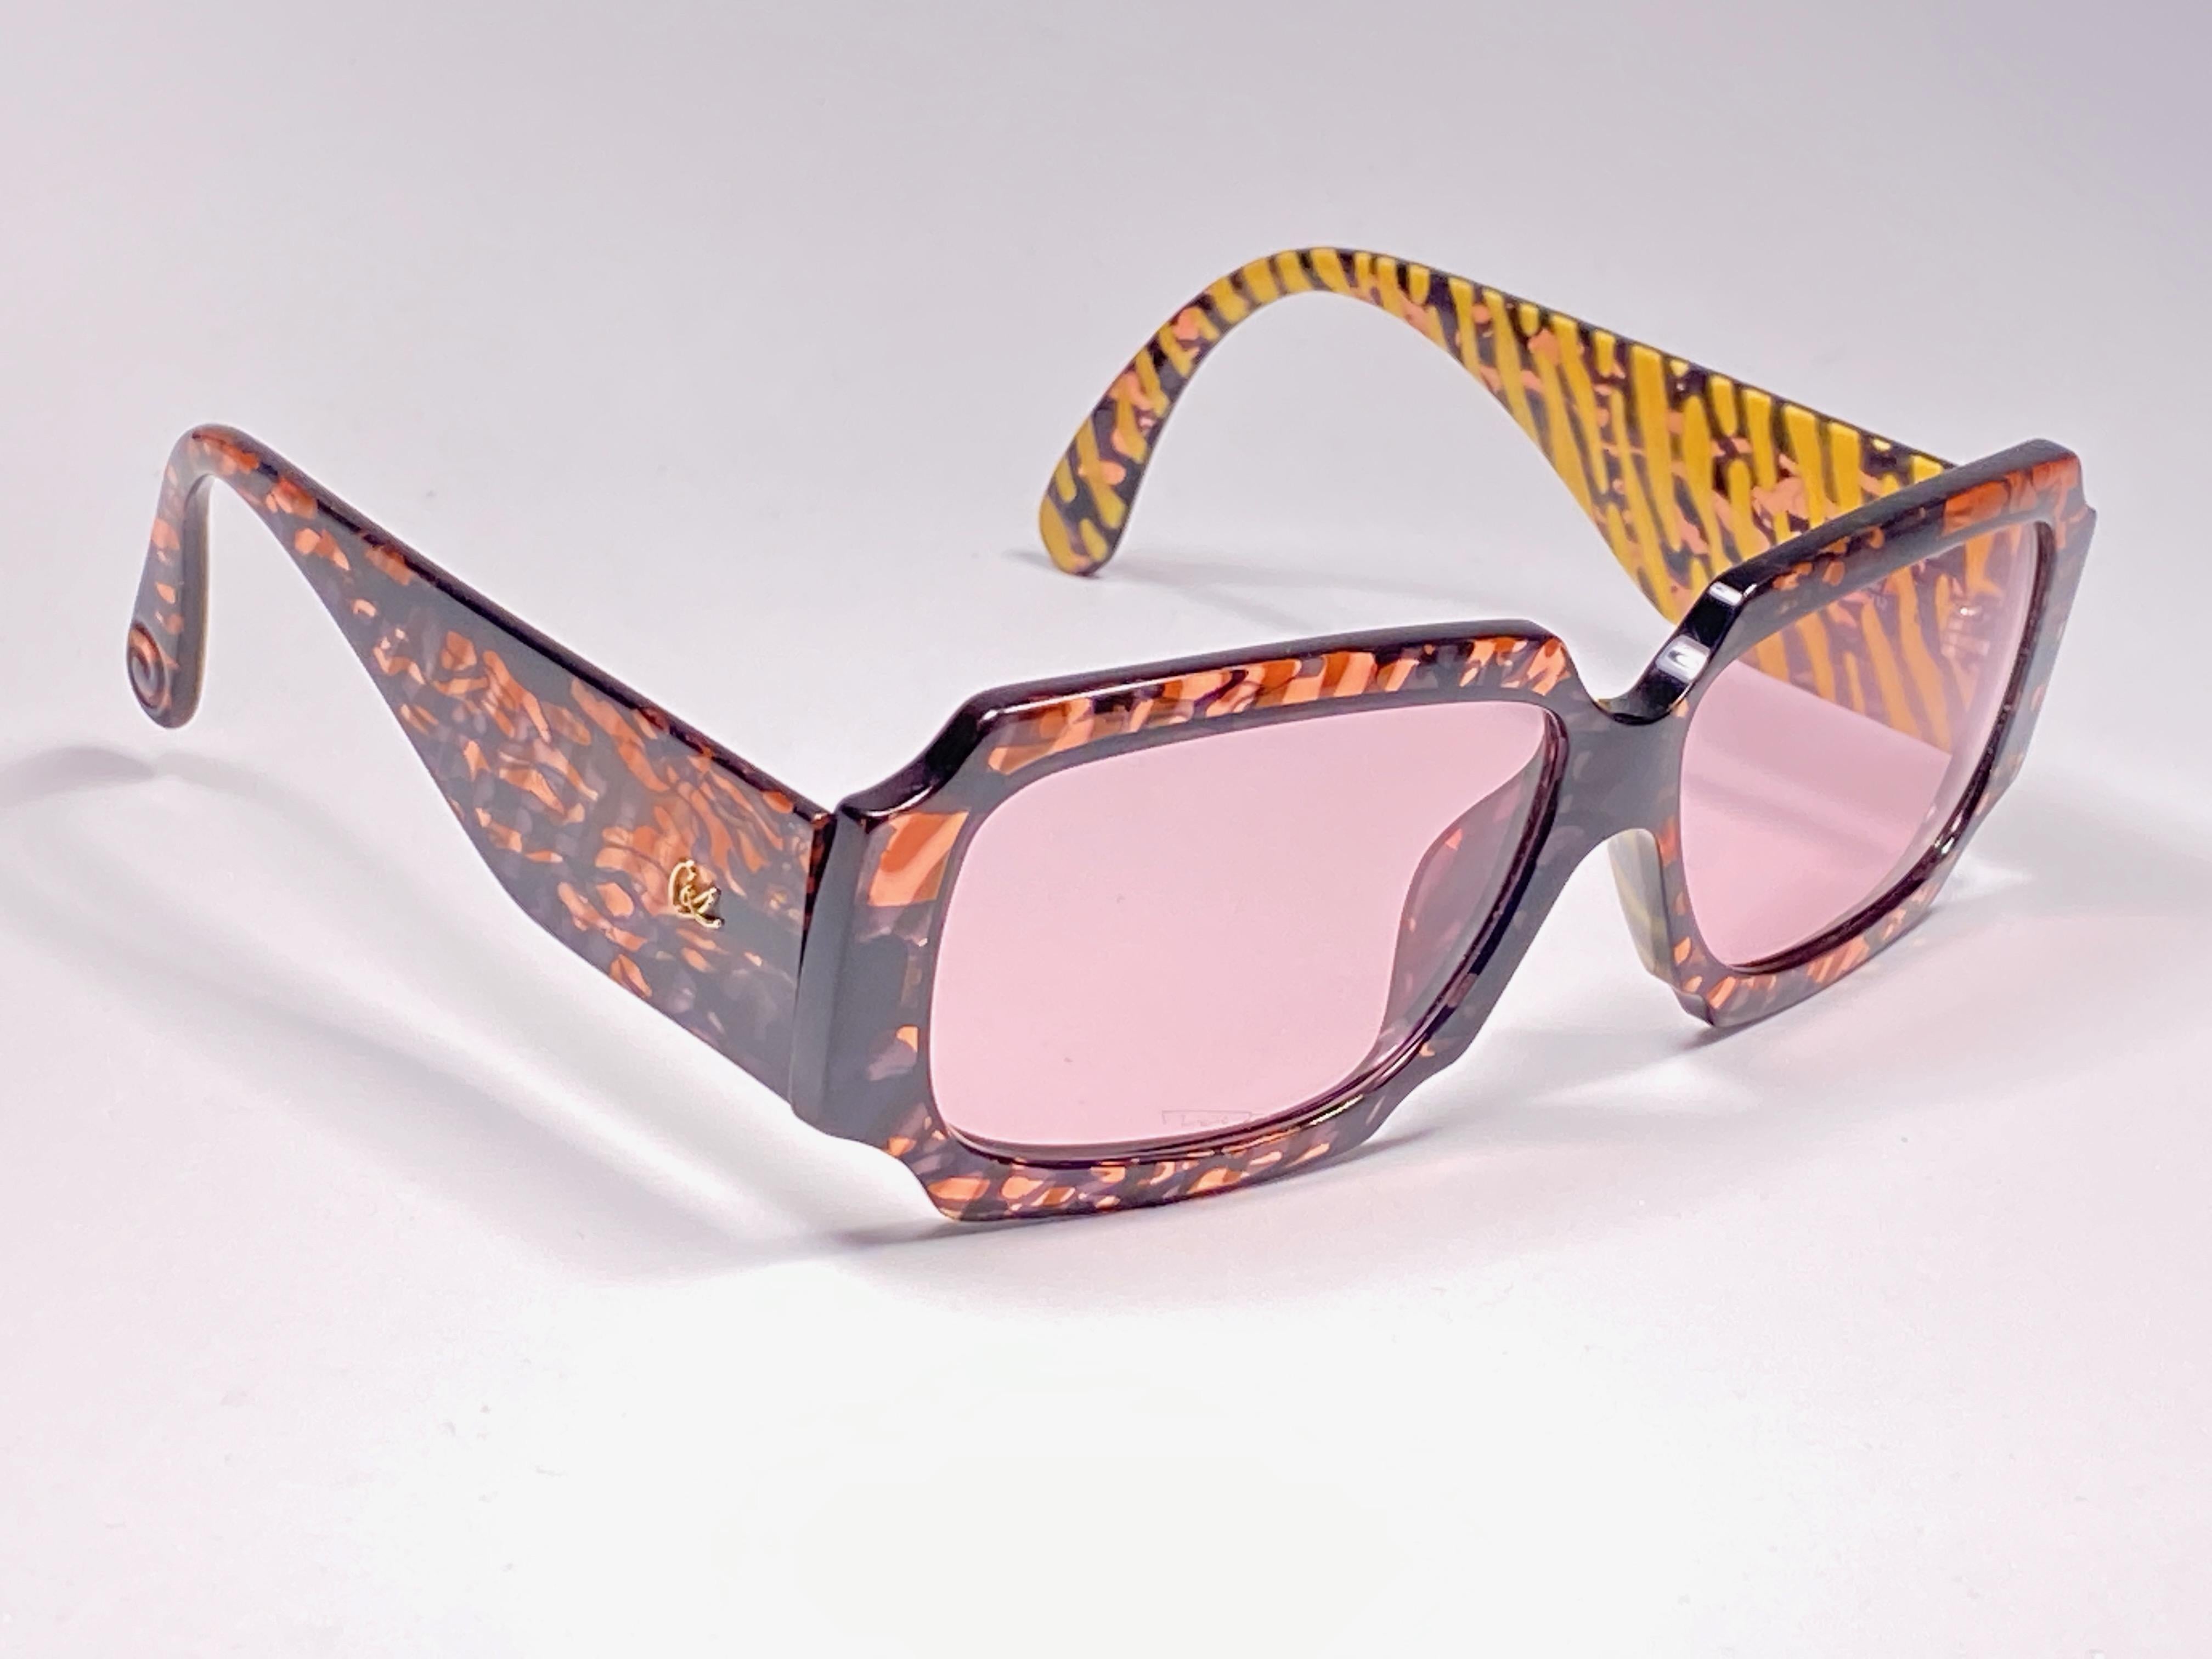 Rare pair of New vintage Christian Lacroix sunglasses.   


Oversized frame holding a pair of spotless light rose lenses. 

New, never worn or displayed. 

Made in France.

MEASUREMENTS :



FRONT : 14 CMS

LENS HEIGHT : 4 CMS

LENS WIDTH : 5.5 CMS